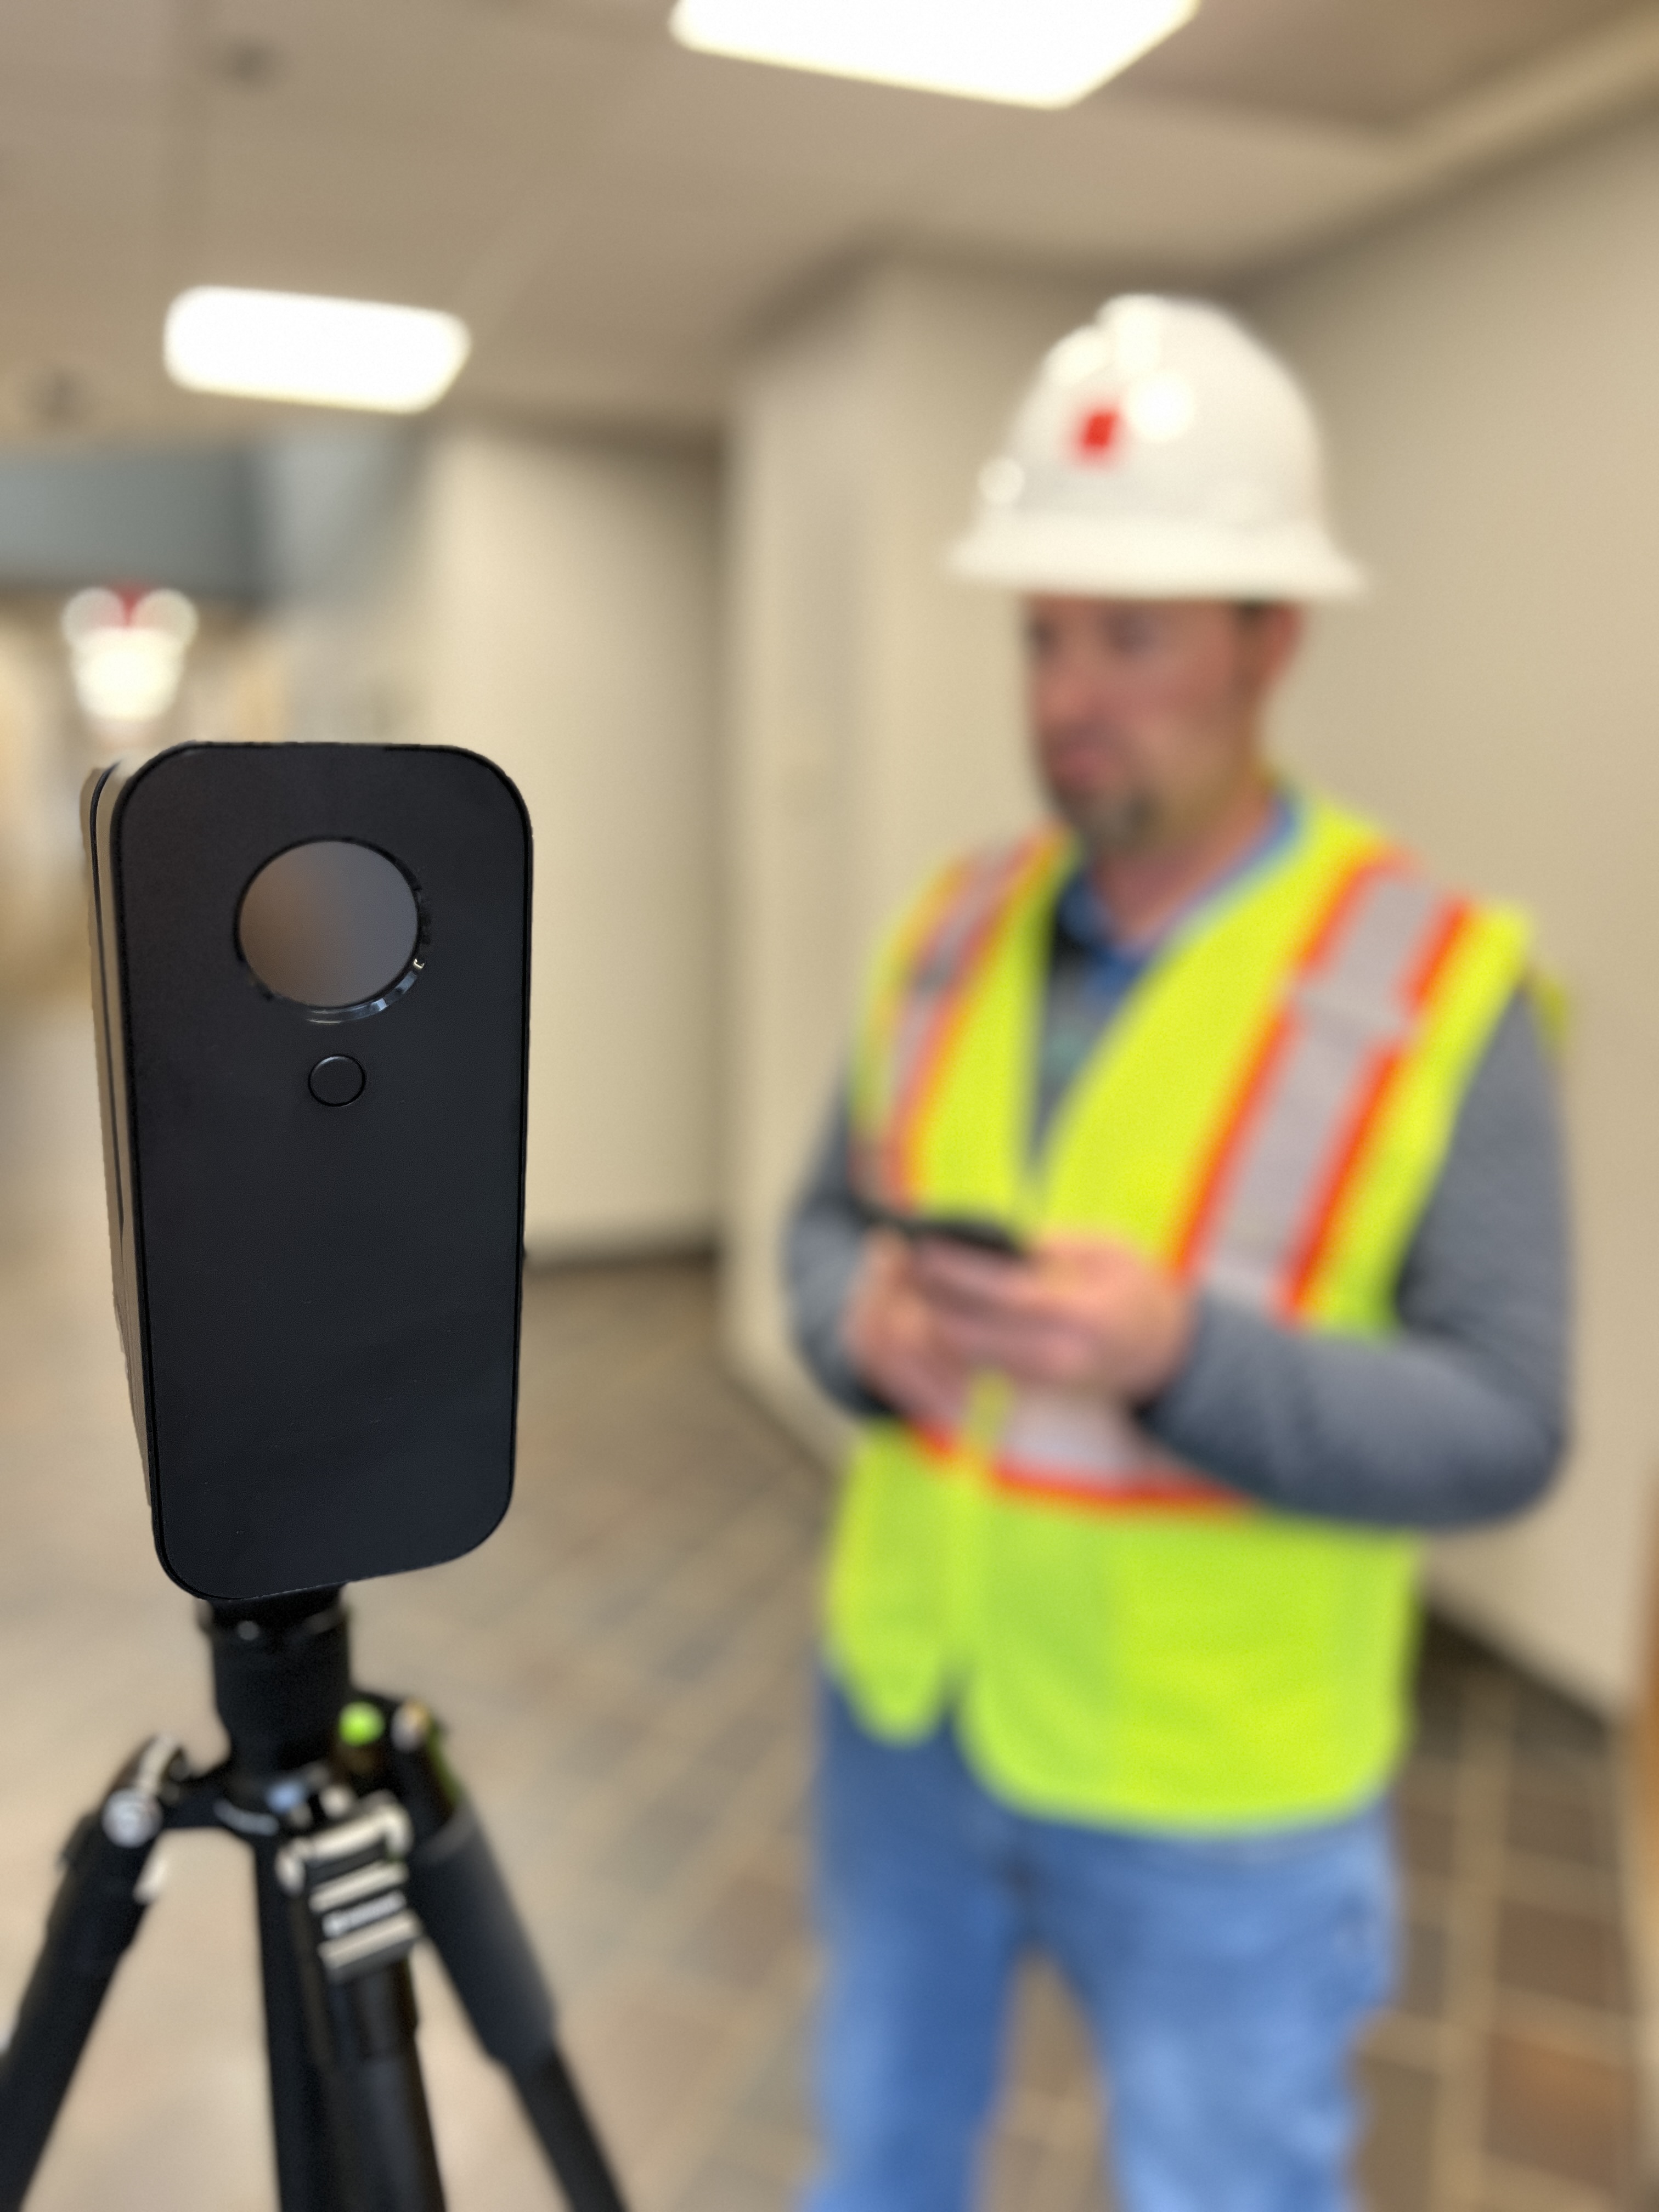 Behind the Scenes: How 3D Scanning Empowers Your Vision2